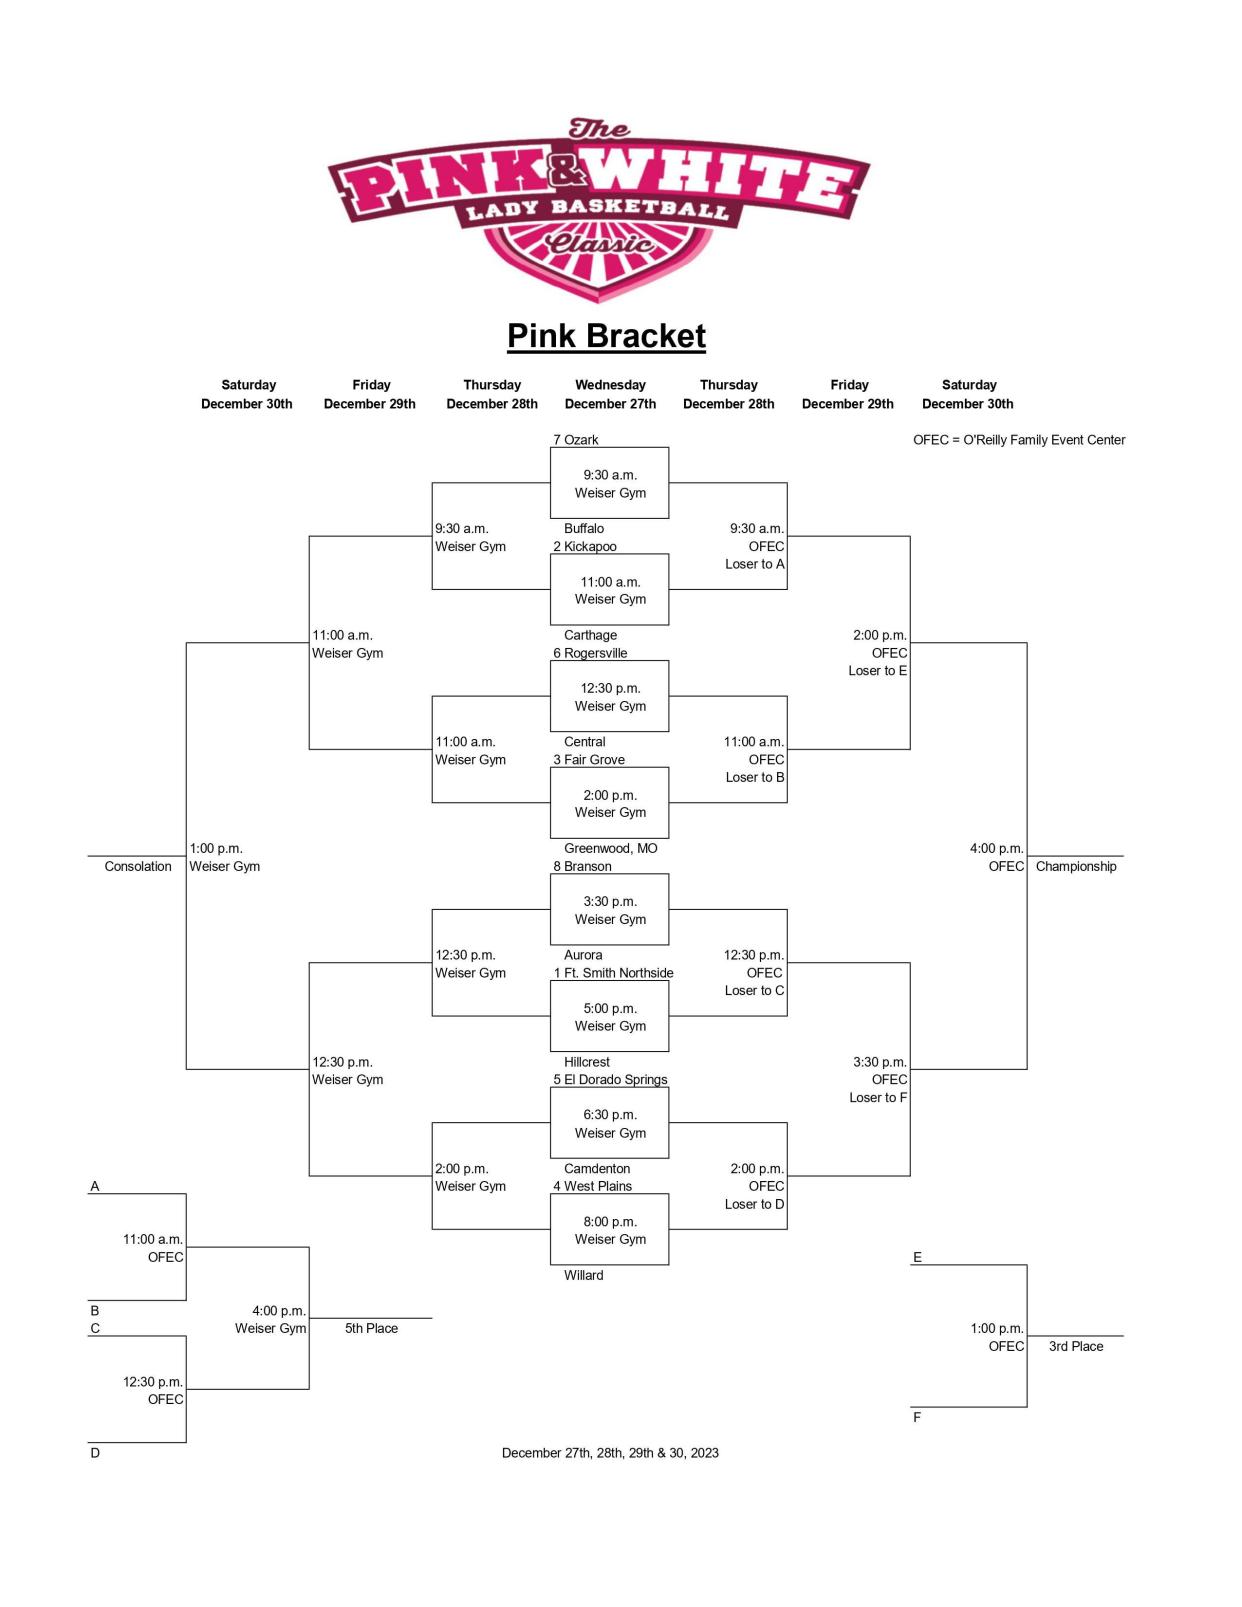 The brackets for the 2023 Pink and White tournaments have been released.